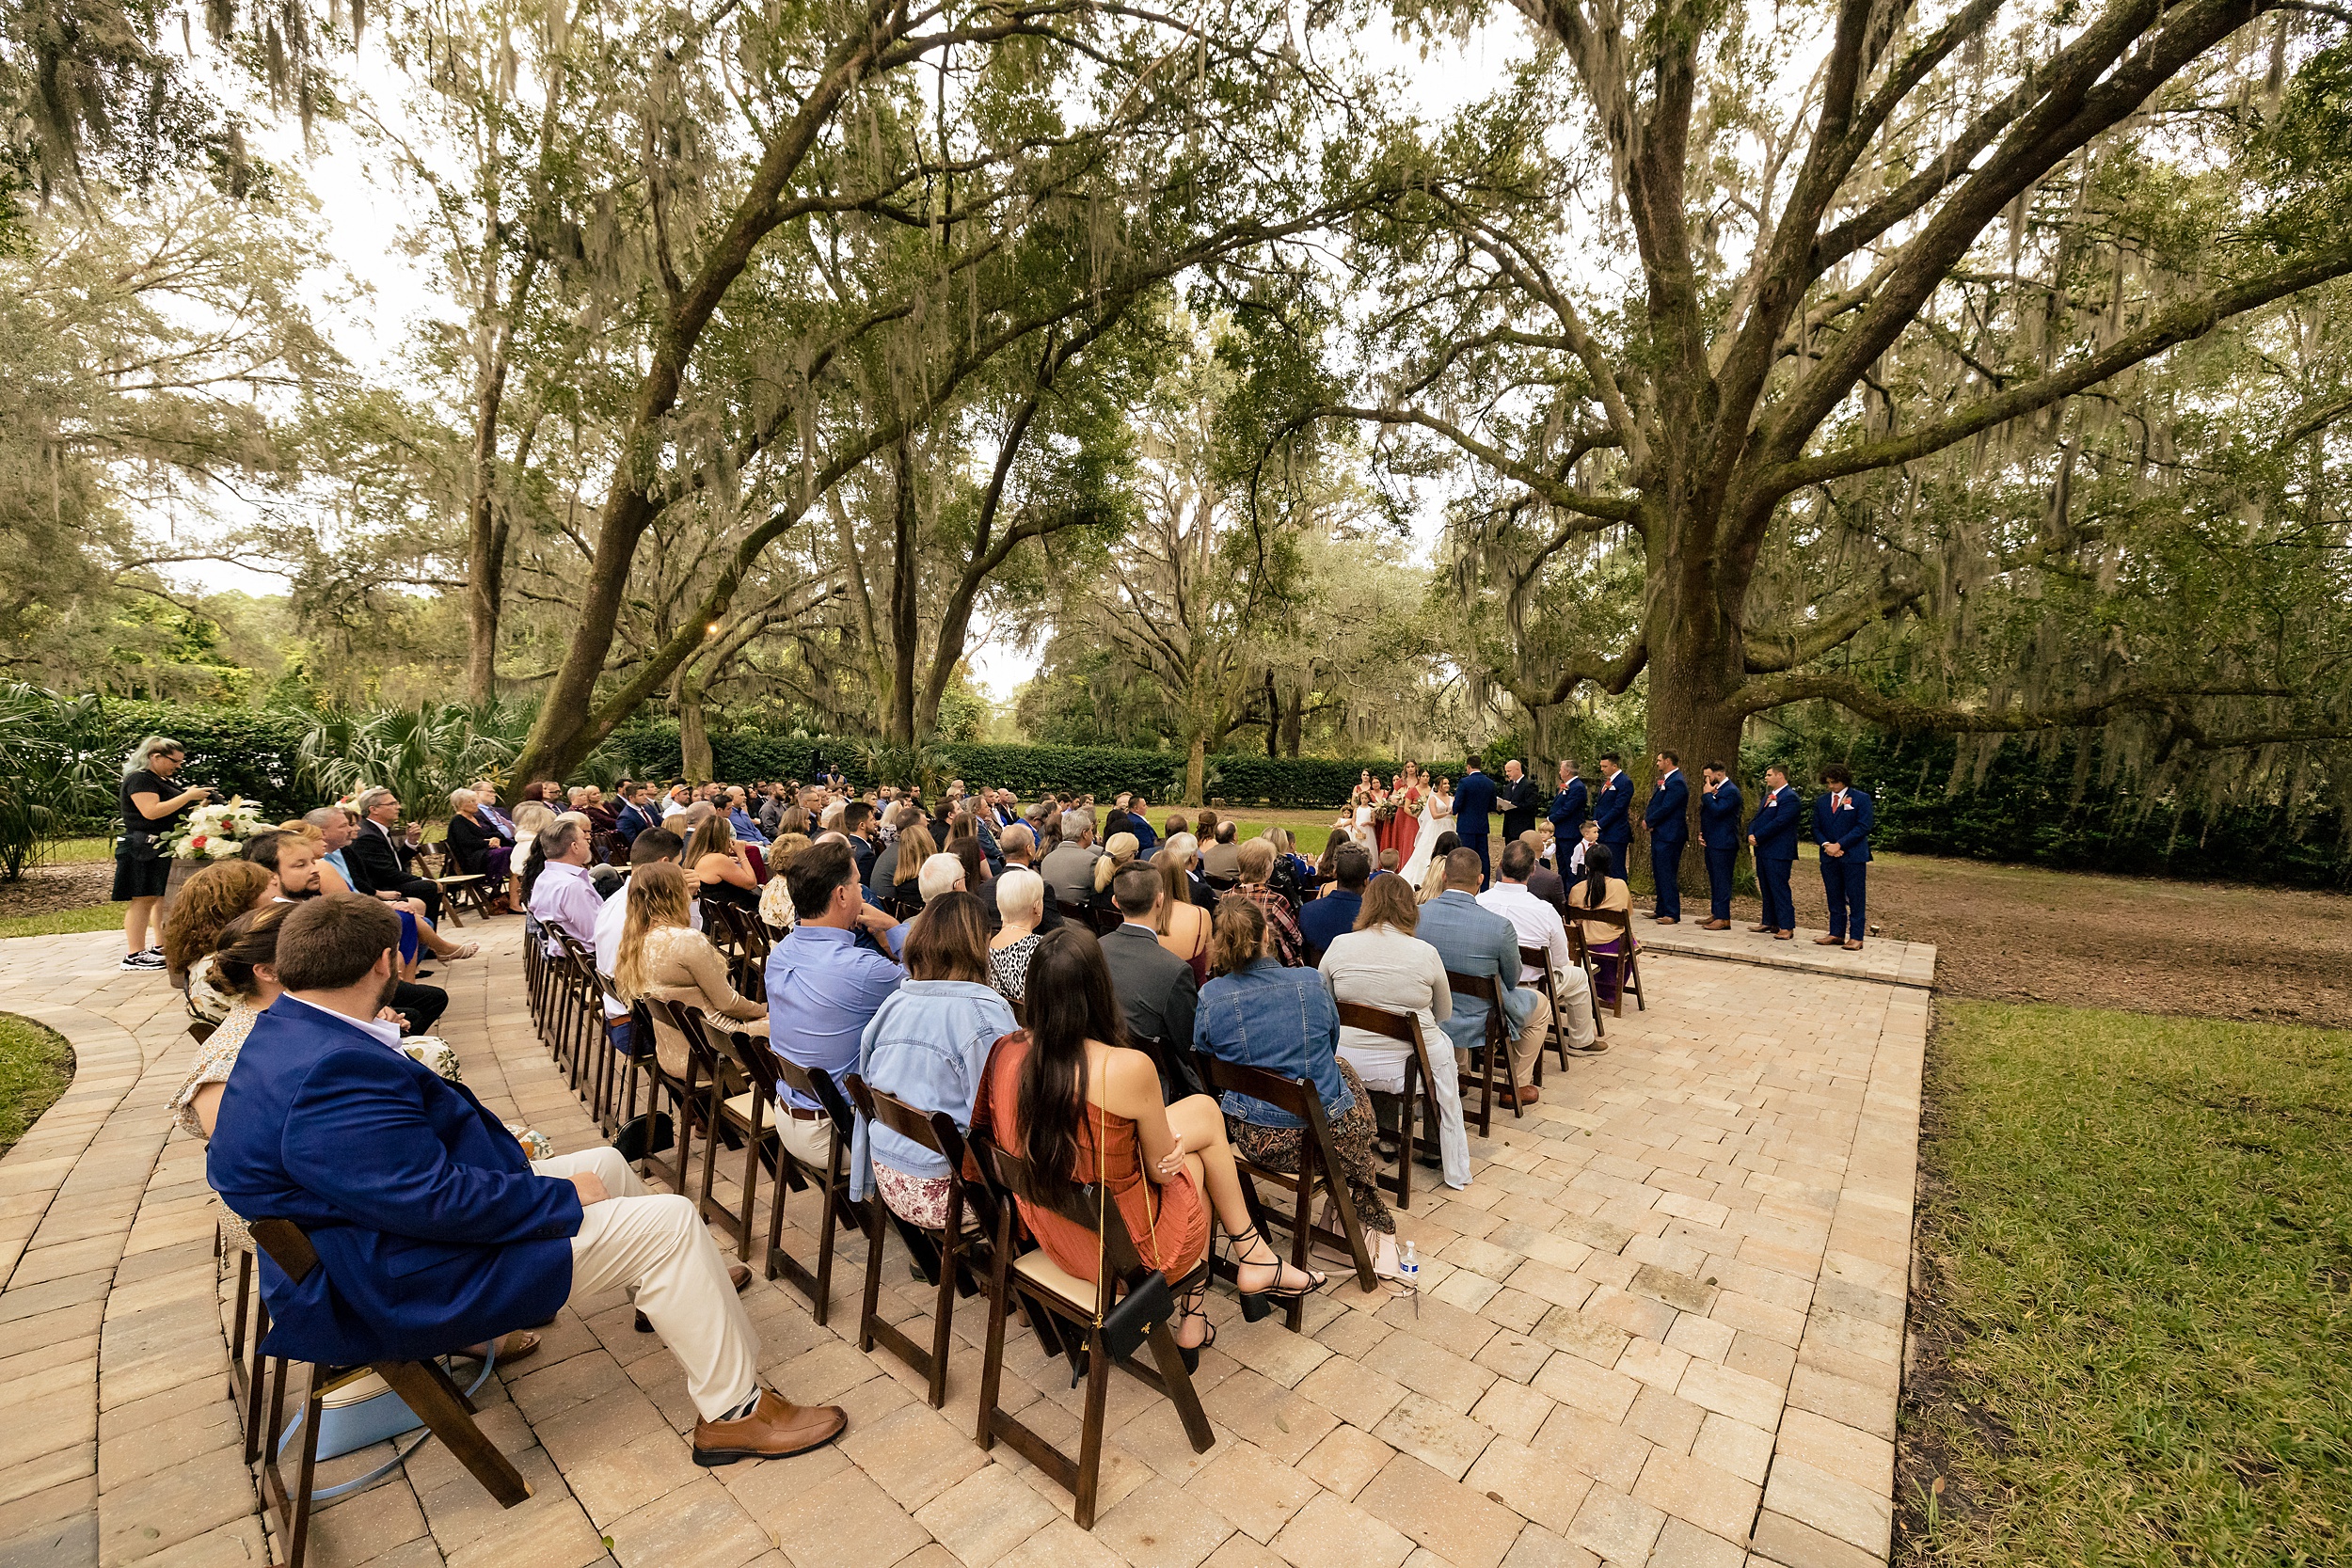 A view of a bowing oaks wedding ceremony on an outdoor patio under a canopy of large oak trees